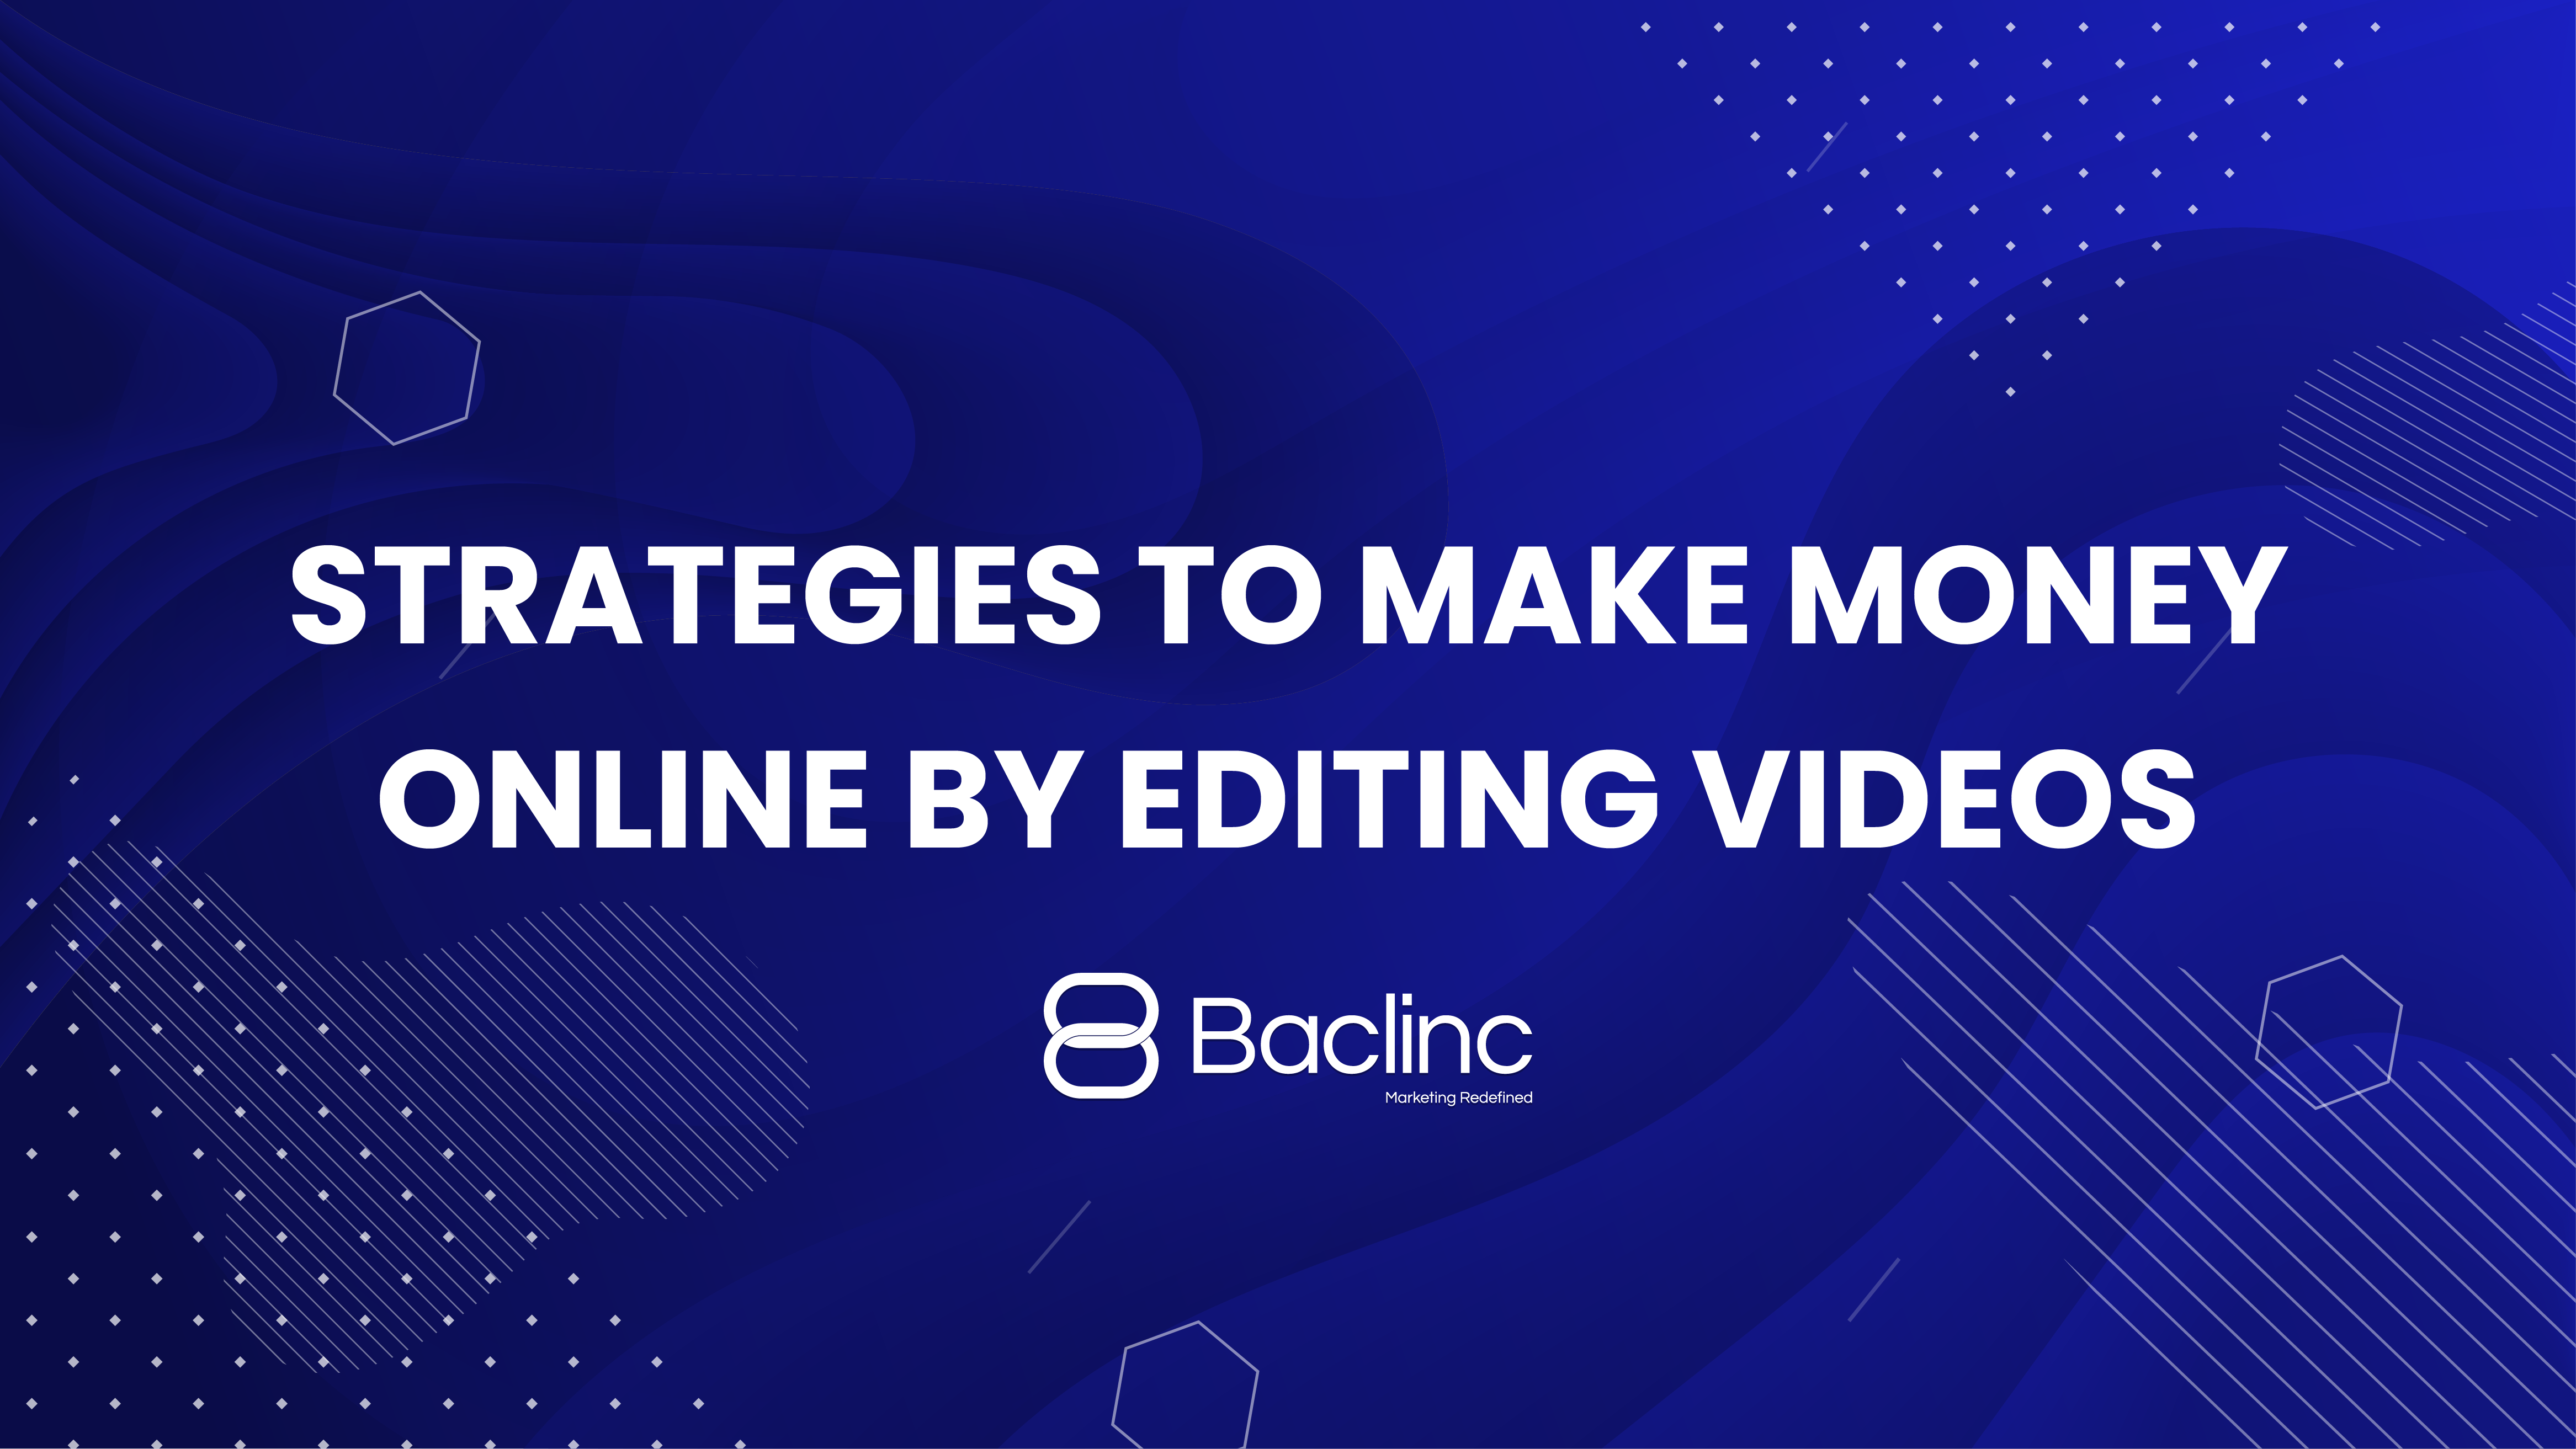 Strategies to Make Money Online by Editing Videos - Baclinc